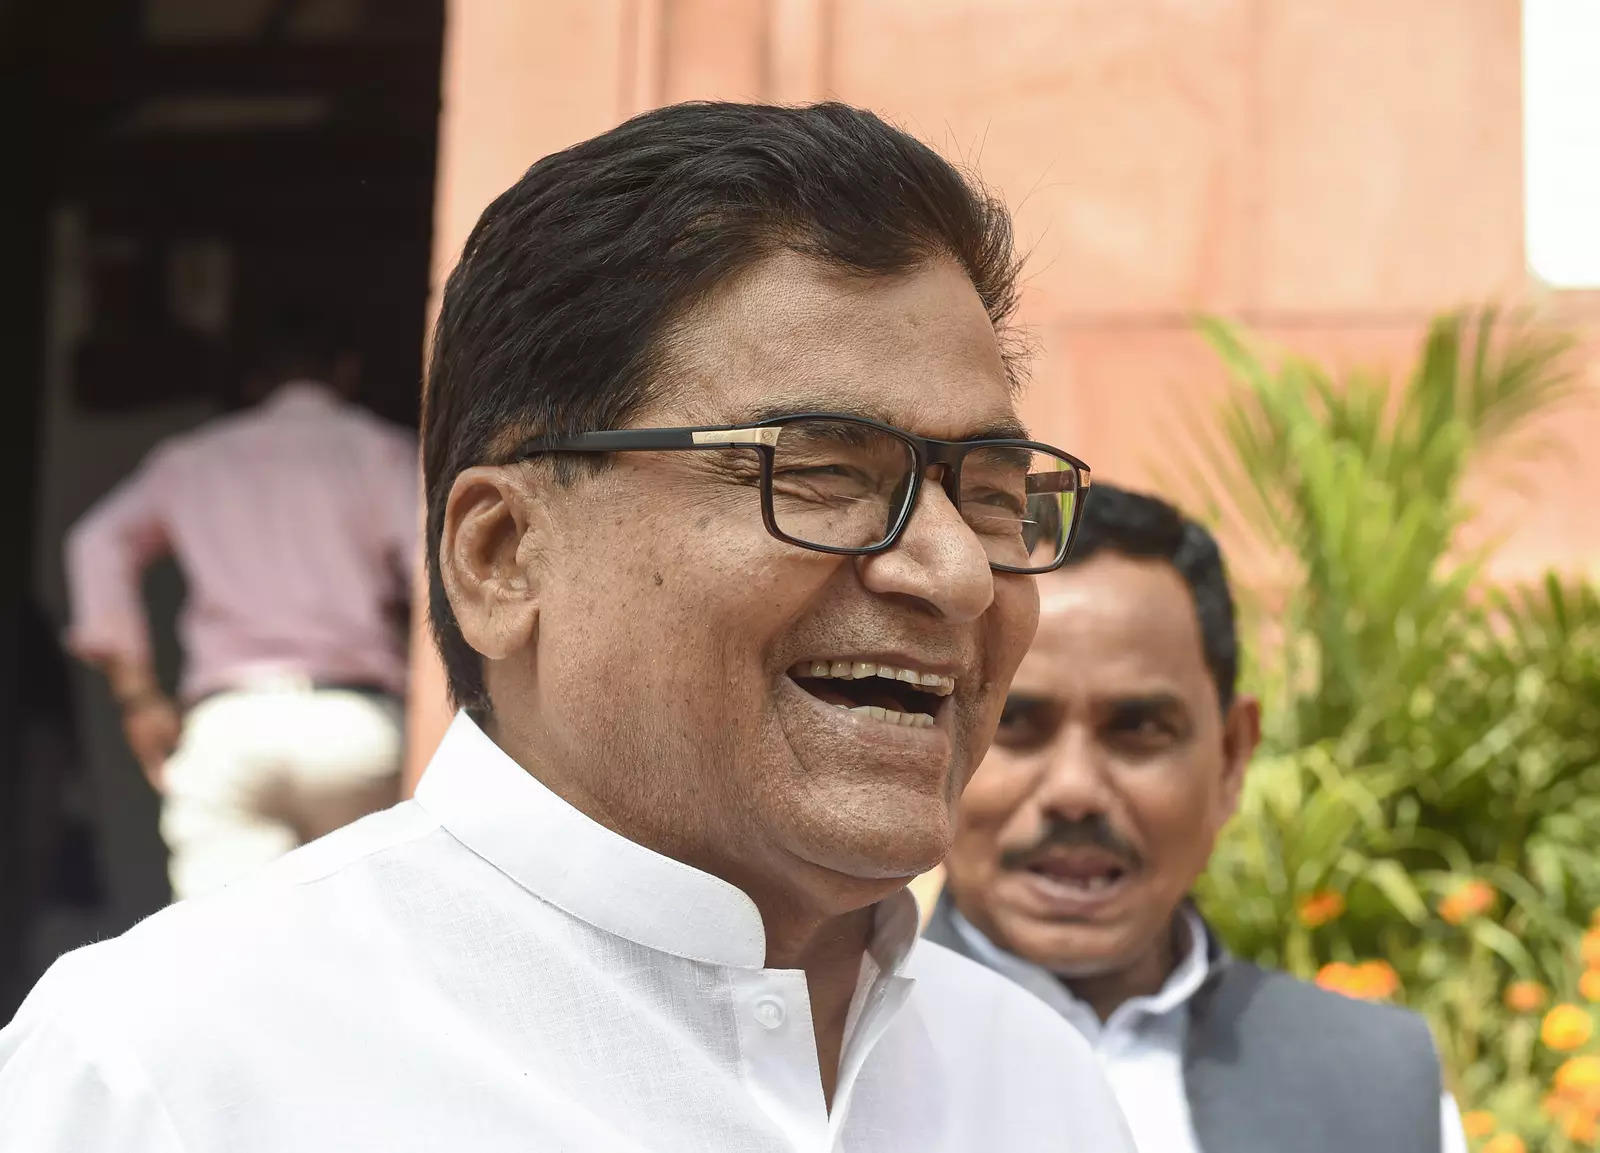 Restore old UPSC exam pattern: SP leader Ramgopal Yadav in RS 